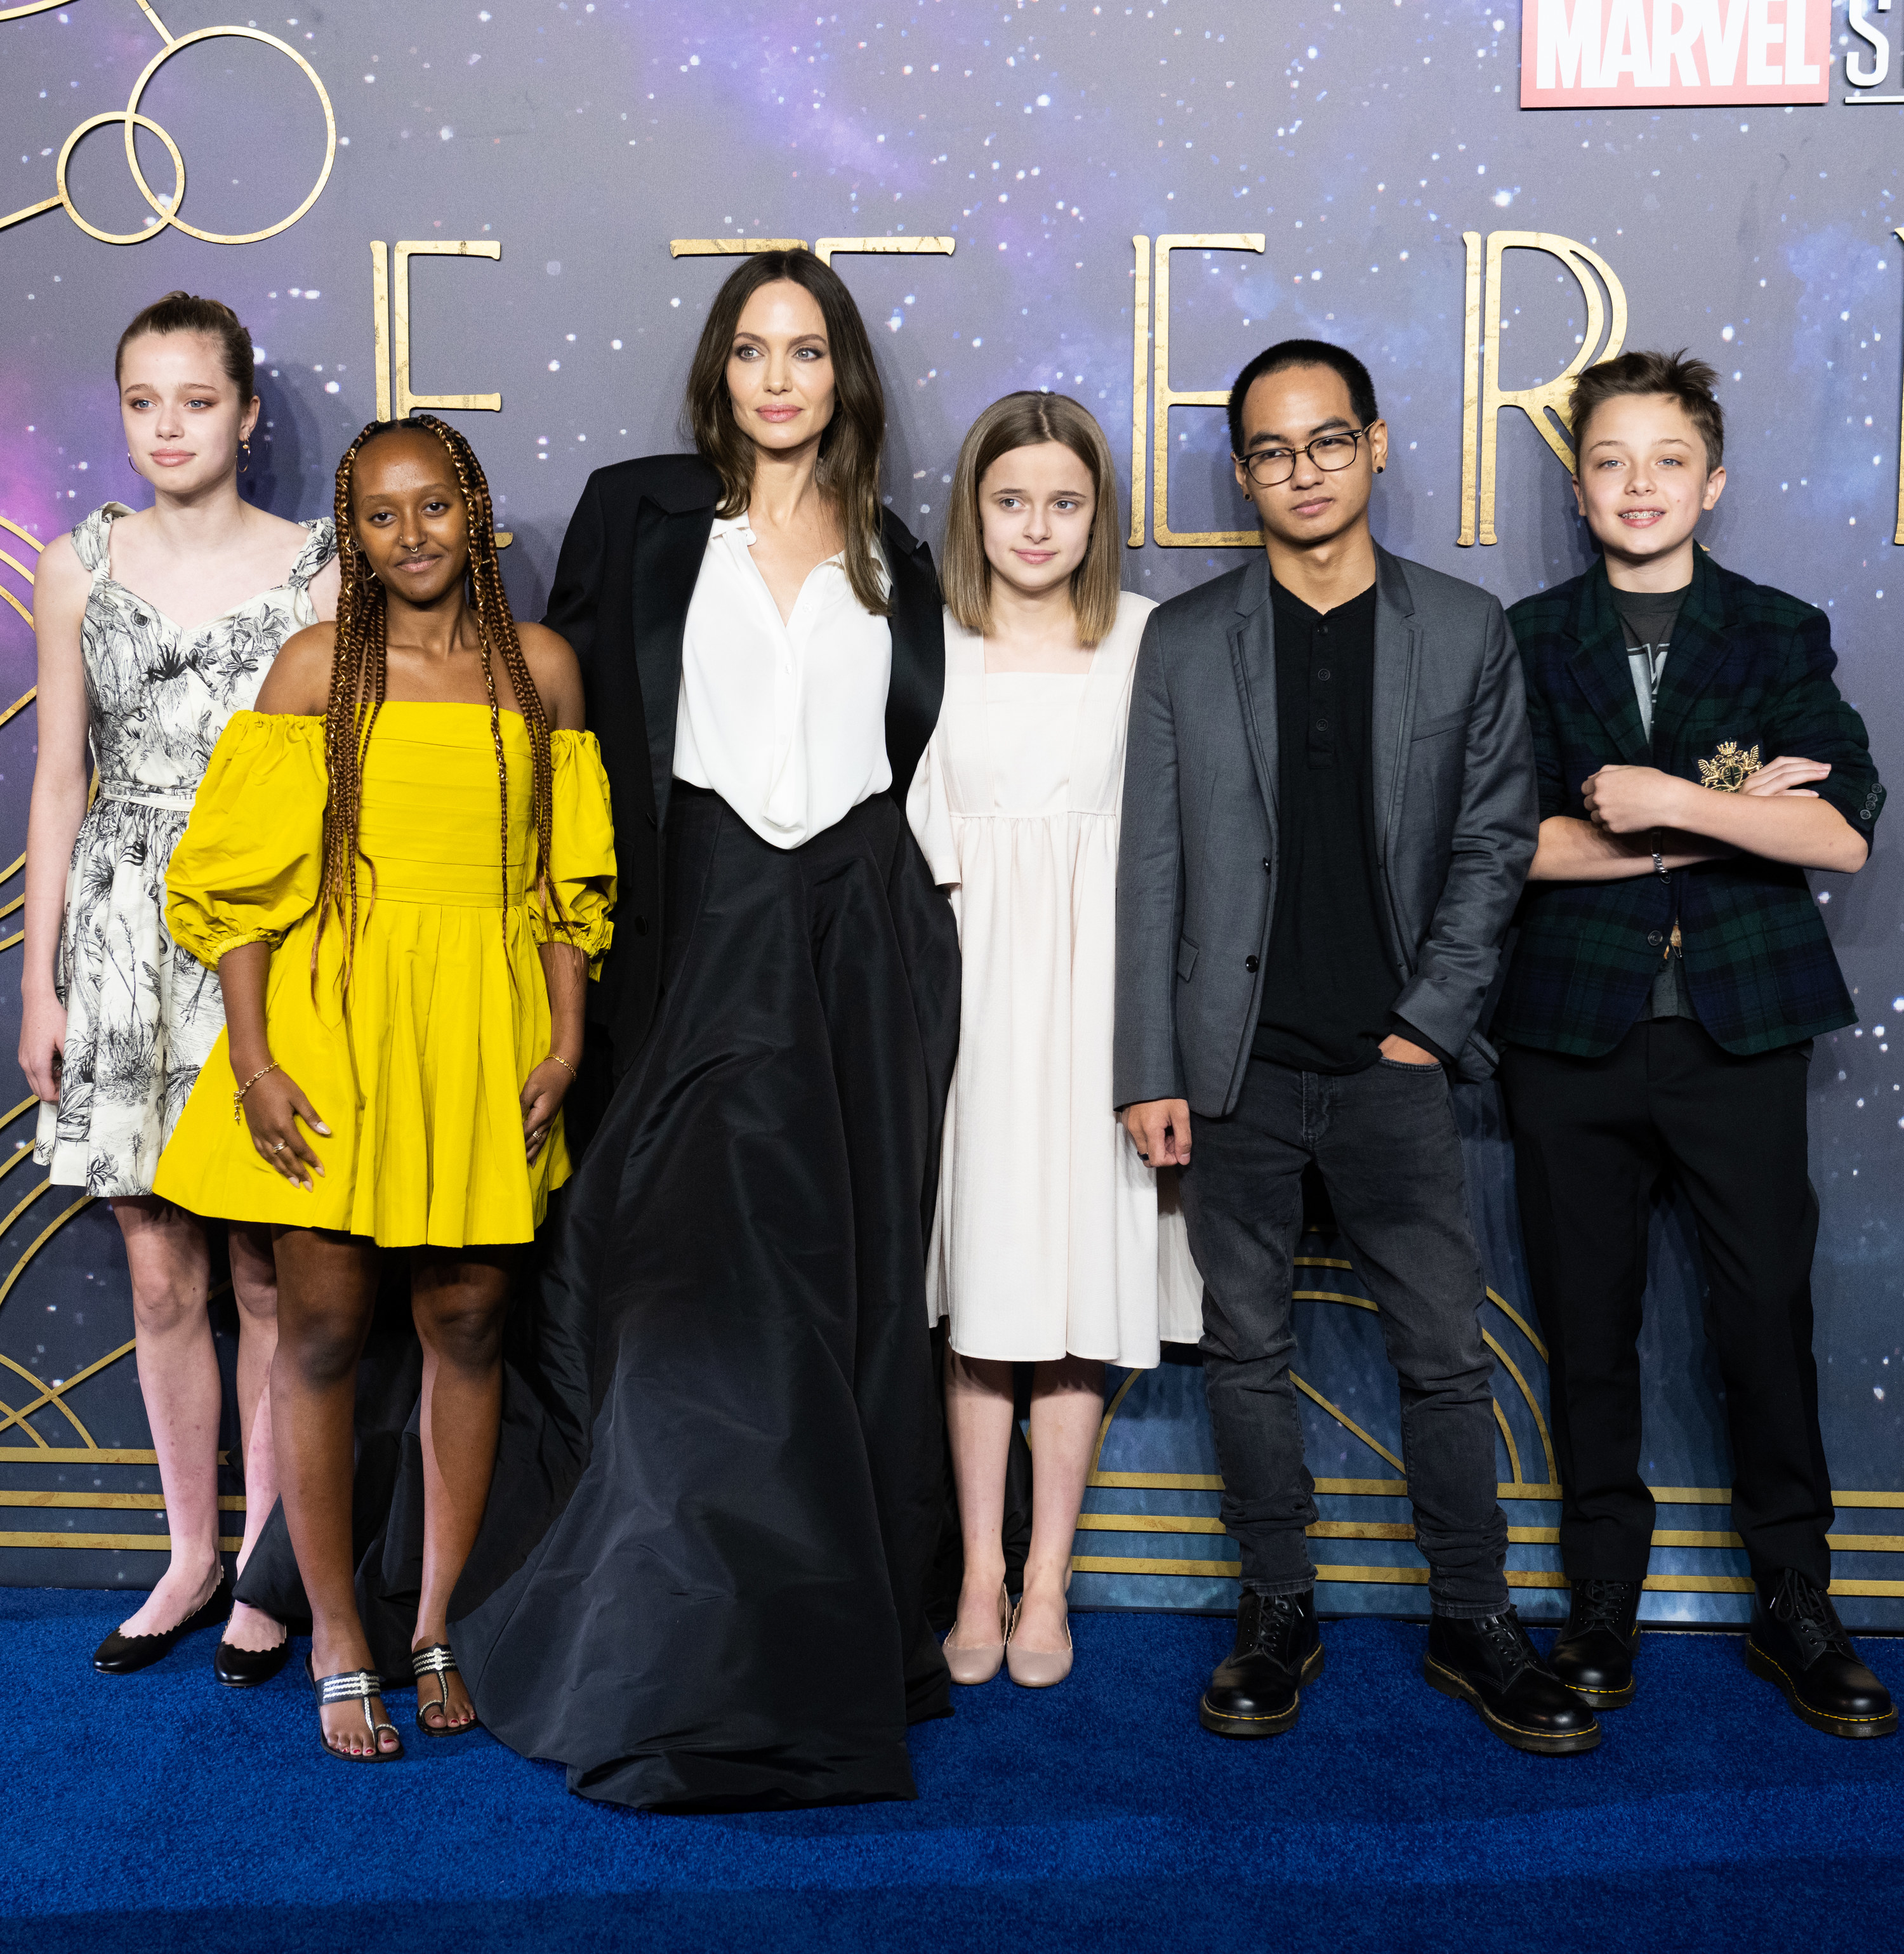 they are at the eternals premiere